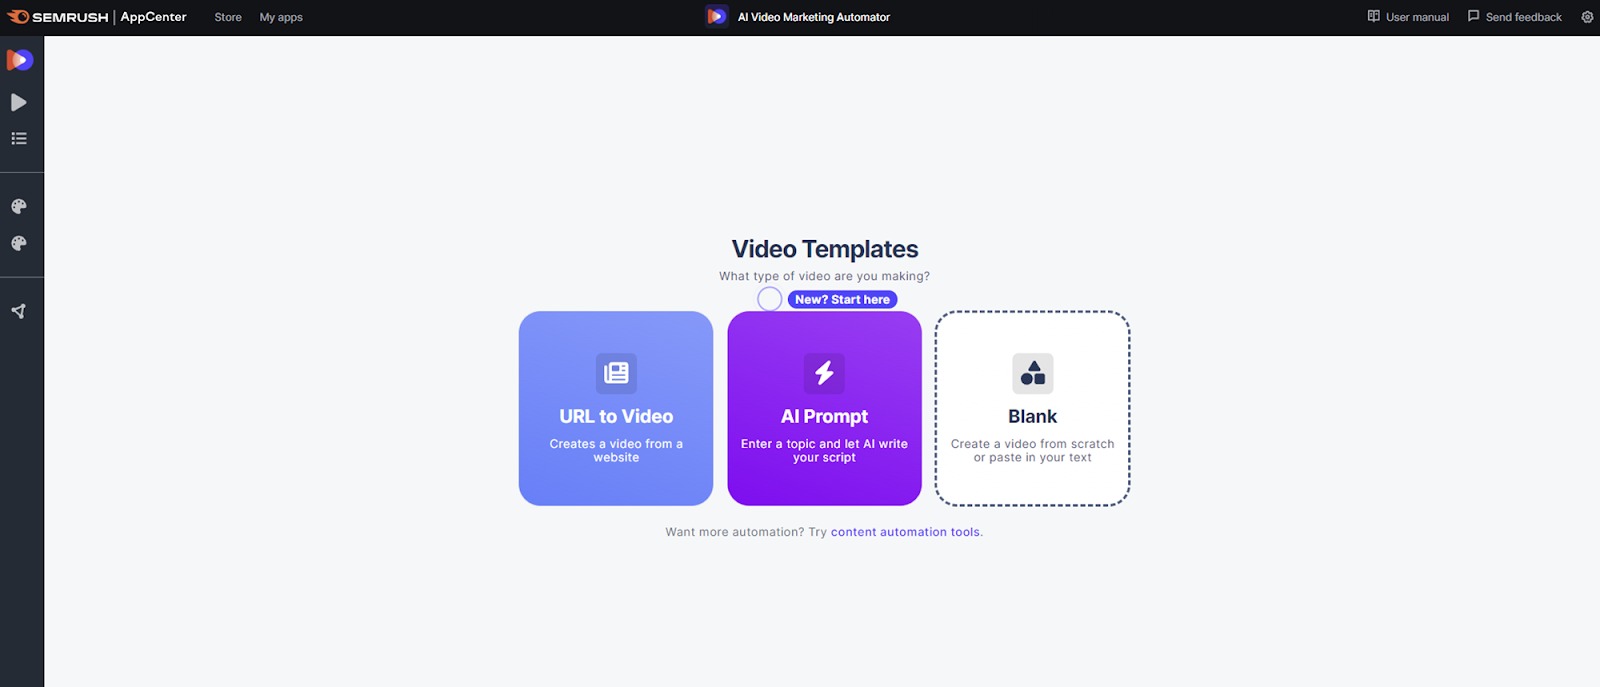 Choosing your video template in the AI Video Marketing Automator app.